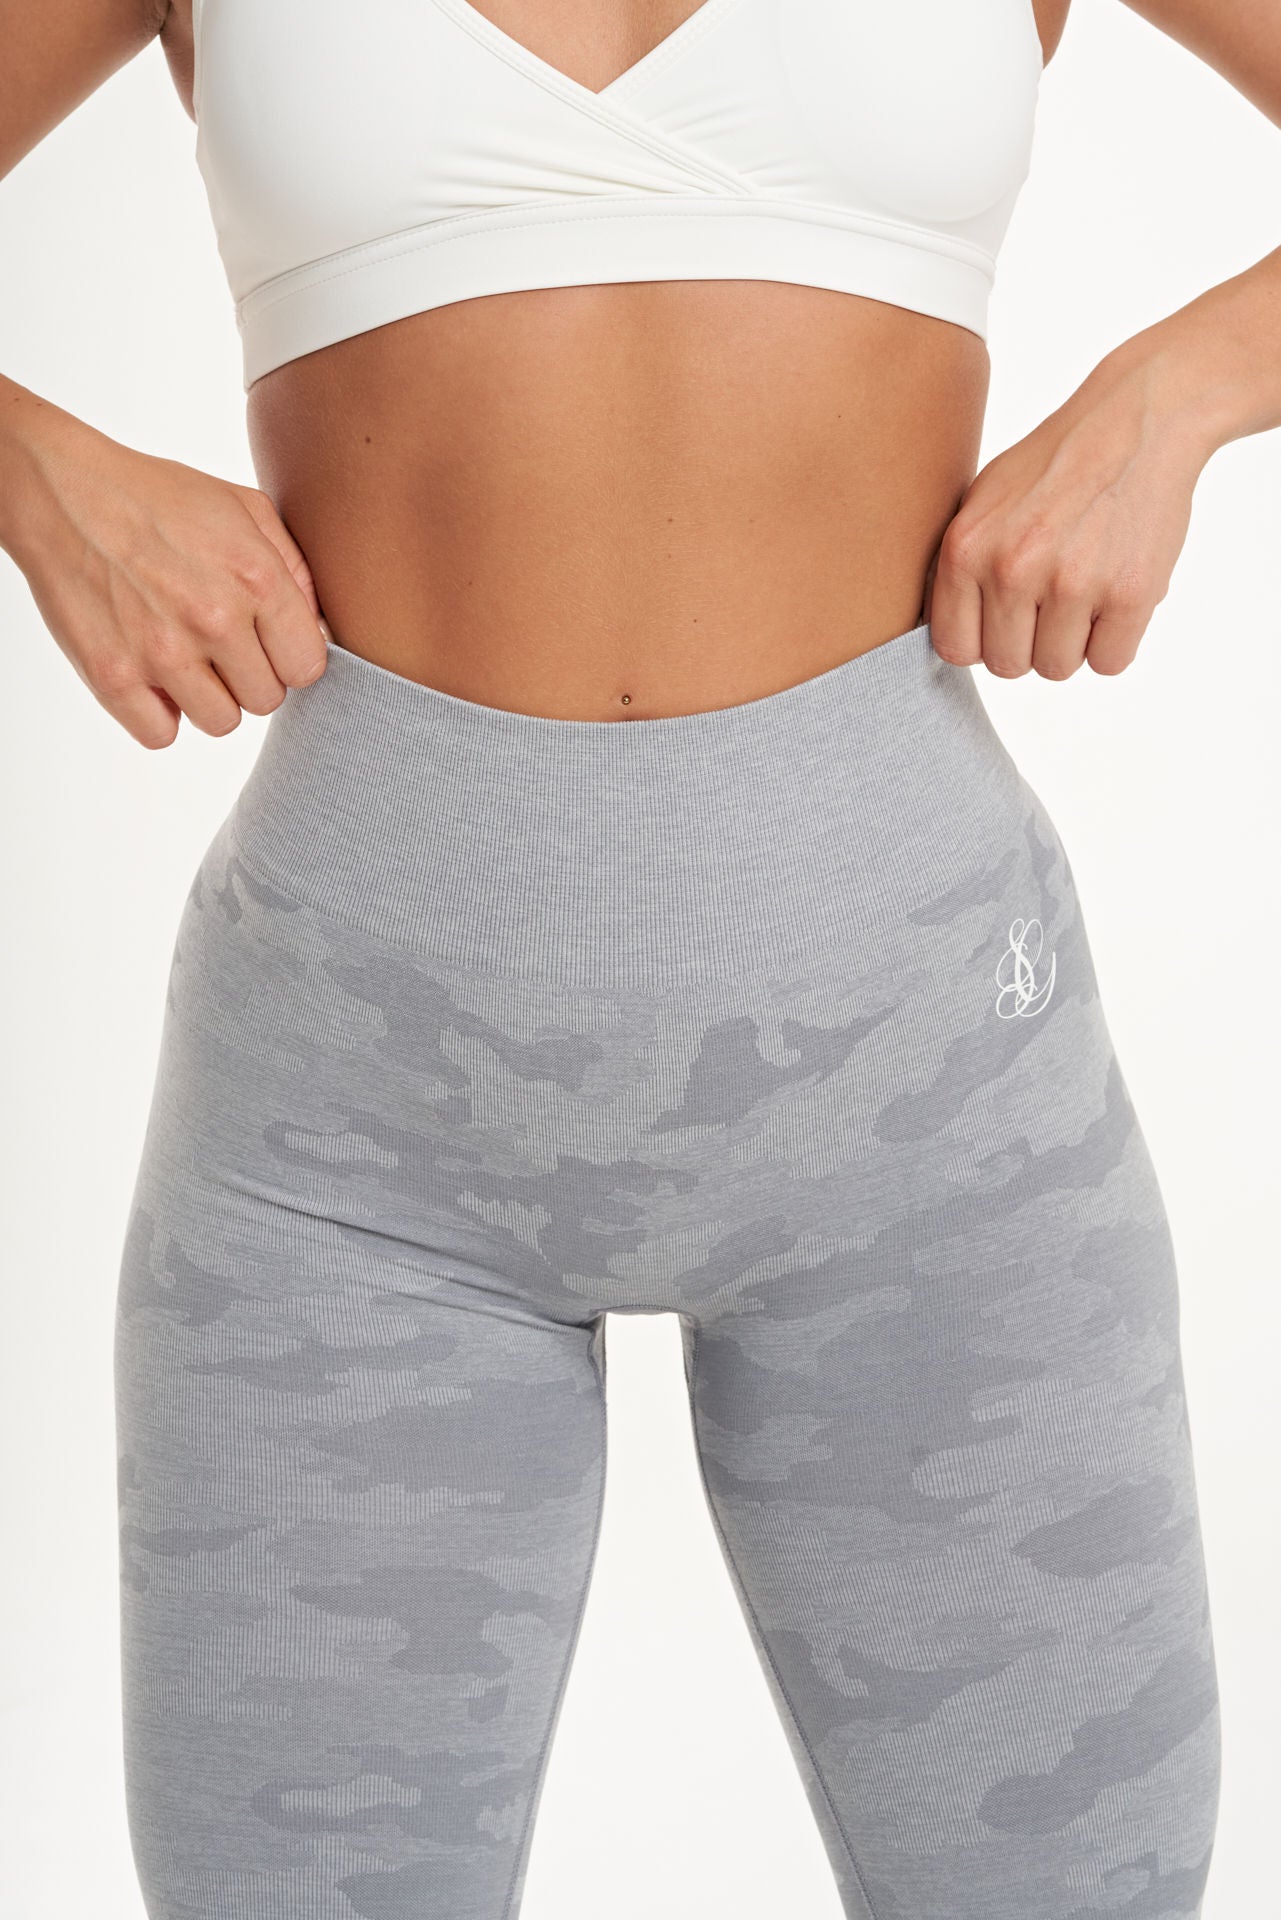 Camo Seamless High Waisted Leggings in Silver